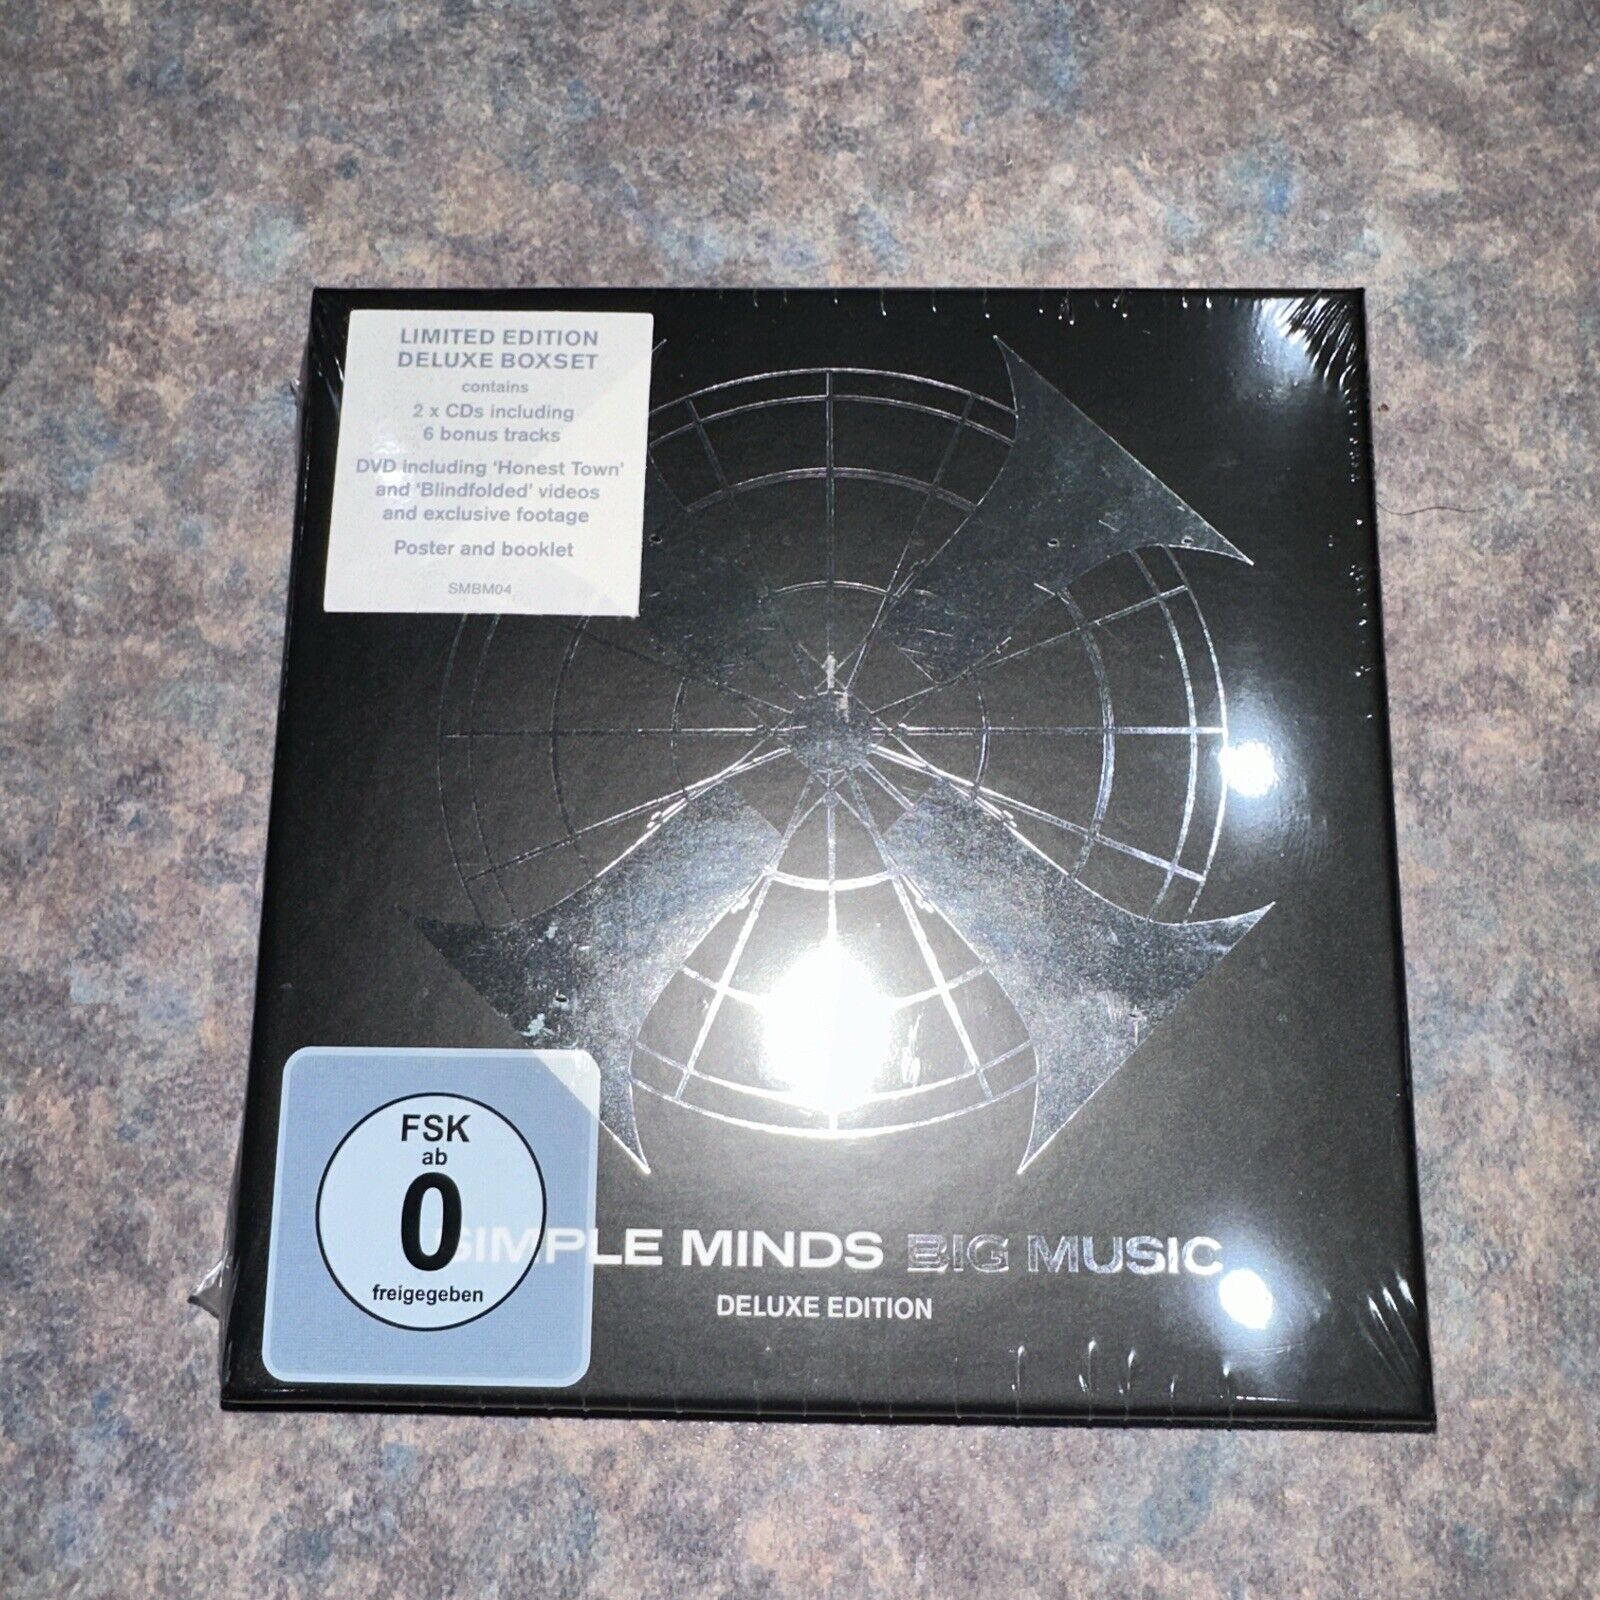 Simple Minds Big Music 2 Cd + Dvd Deluxe Edition Box-Set Sealed